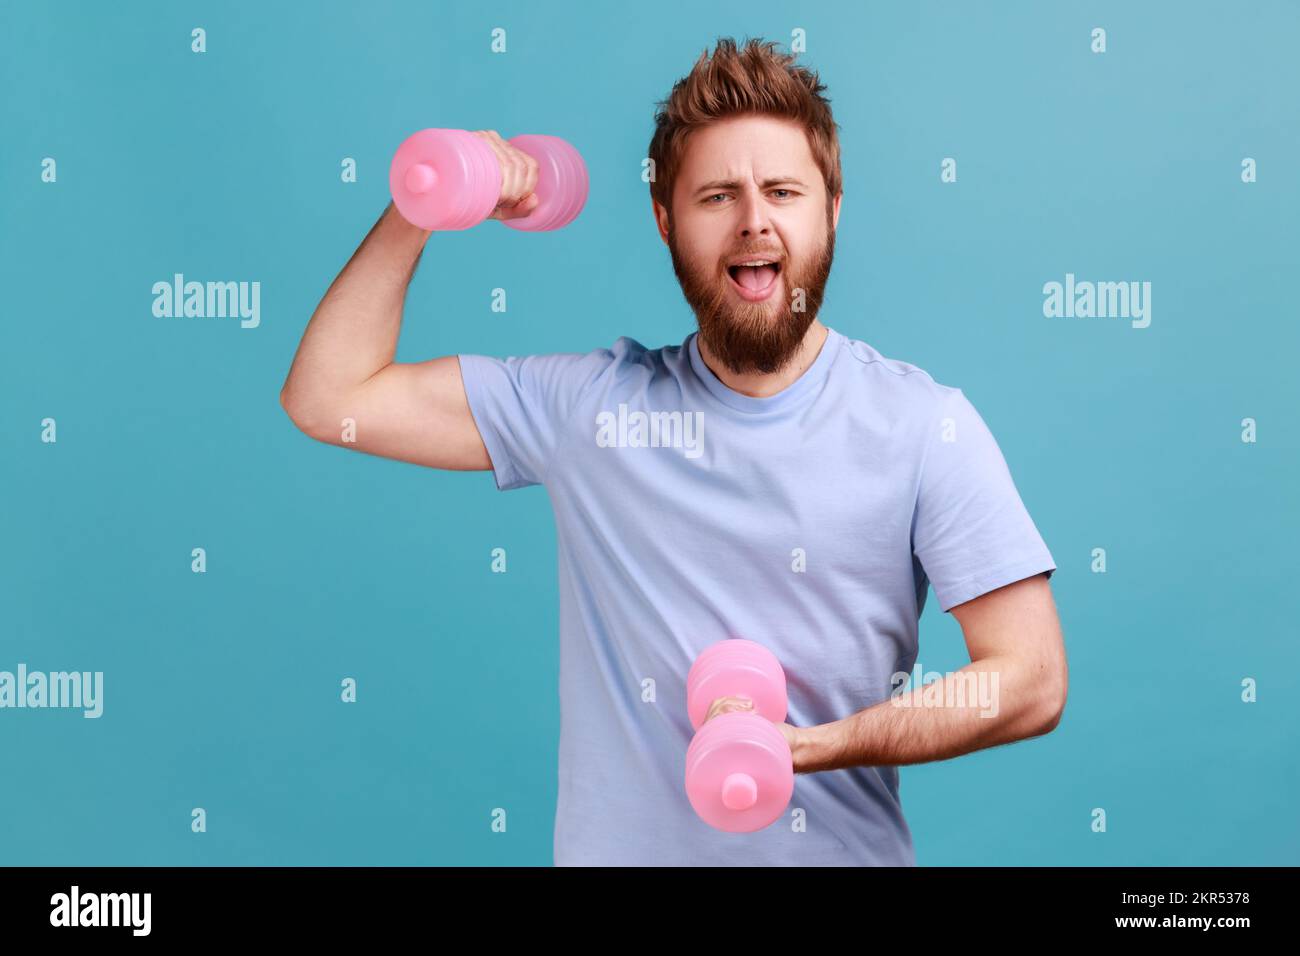 Muscular Bodybuilder Guy Doing Exercises with Gifts Over White B Stock  Image - Image of anniversary, dumbbell: 47889937